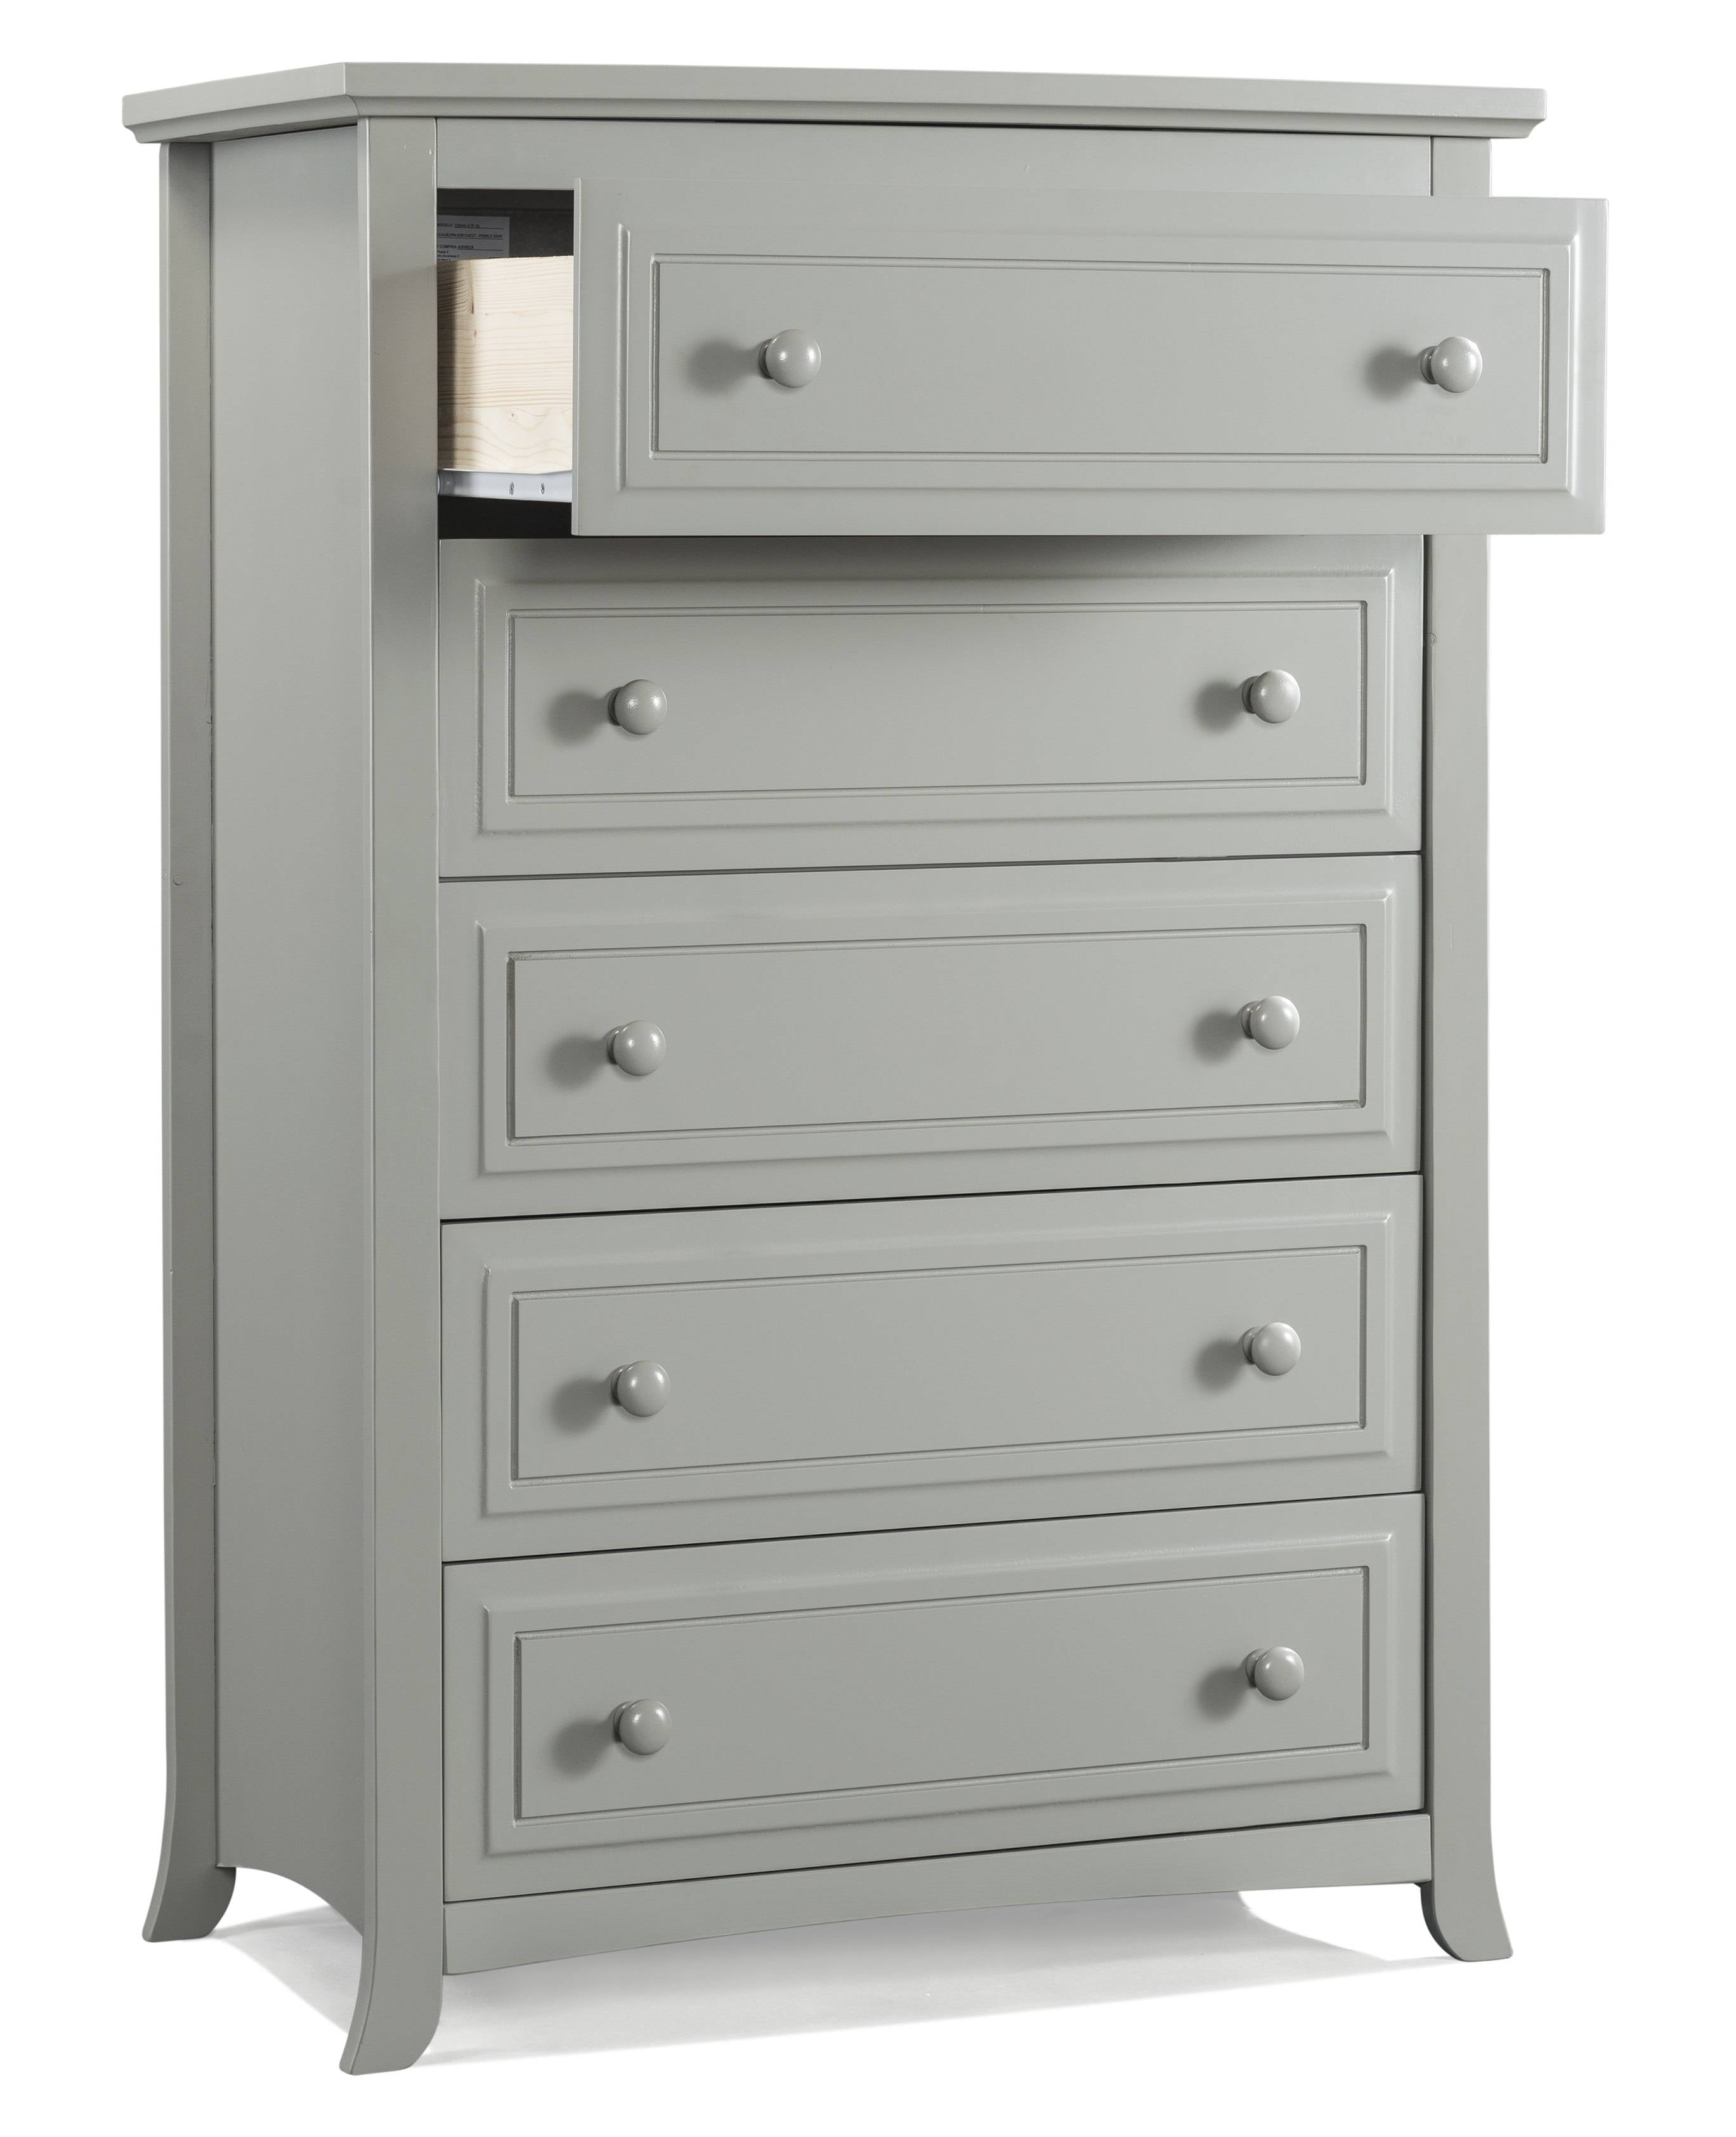 land of nod changing table